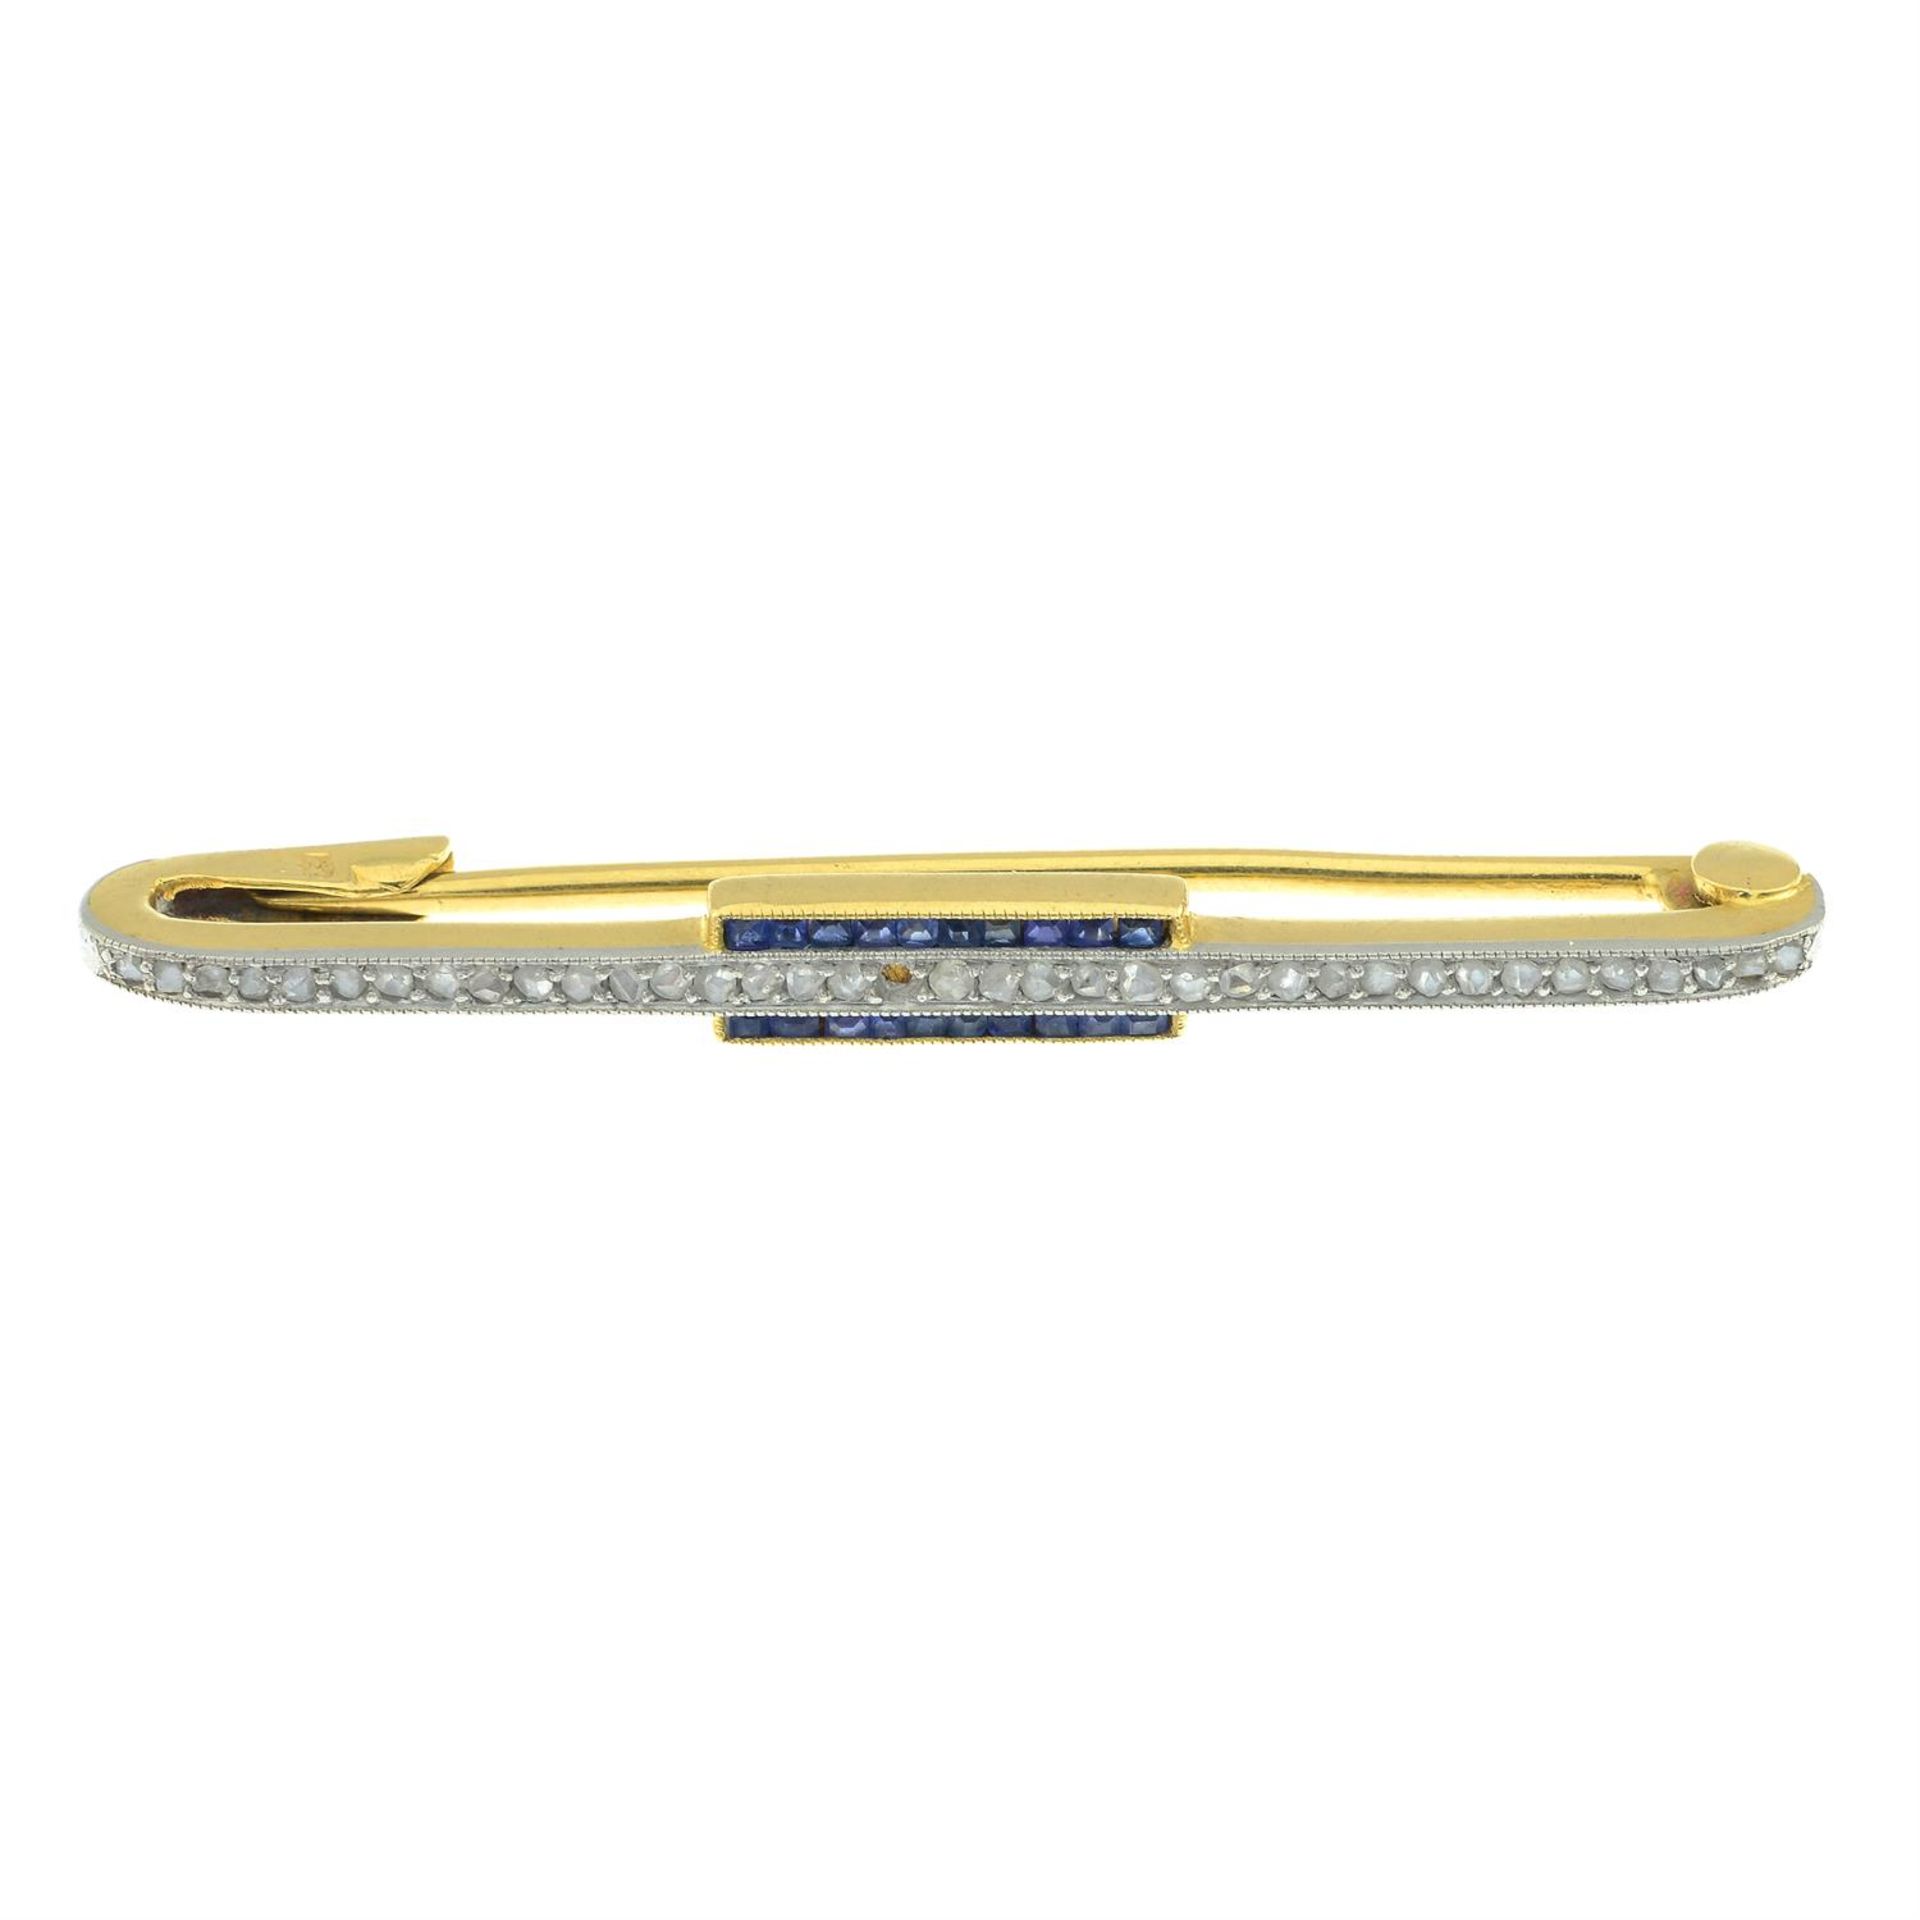 An early 20th century gold and platinum rose-cut diamond and sapphire bar brooch.